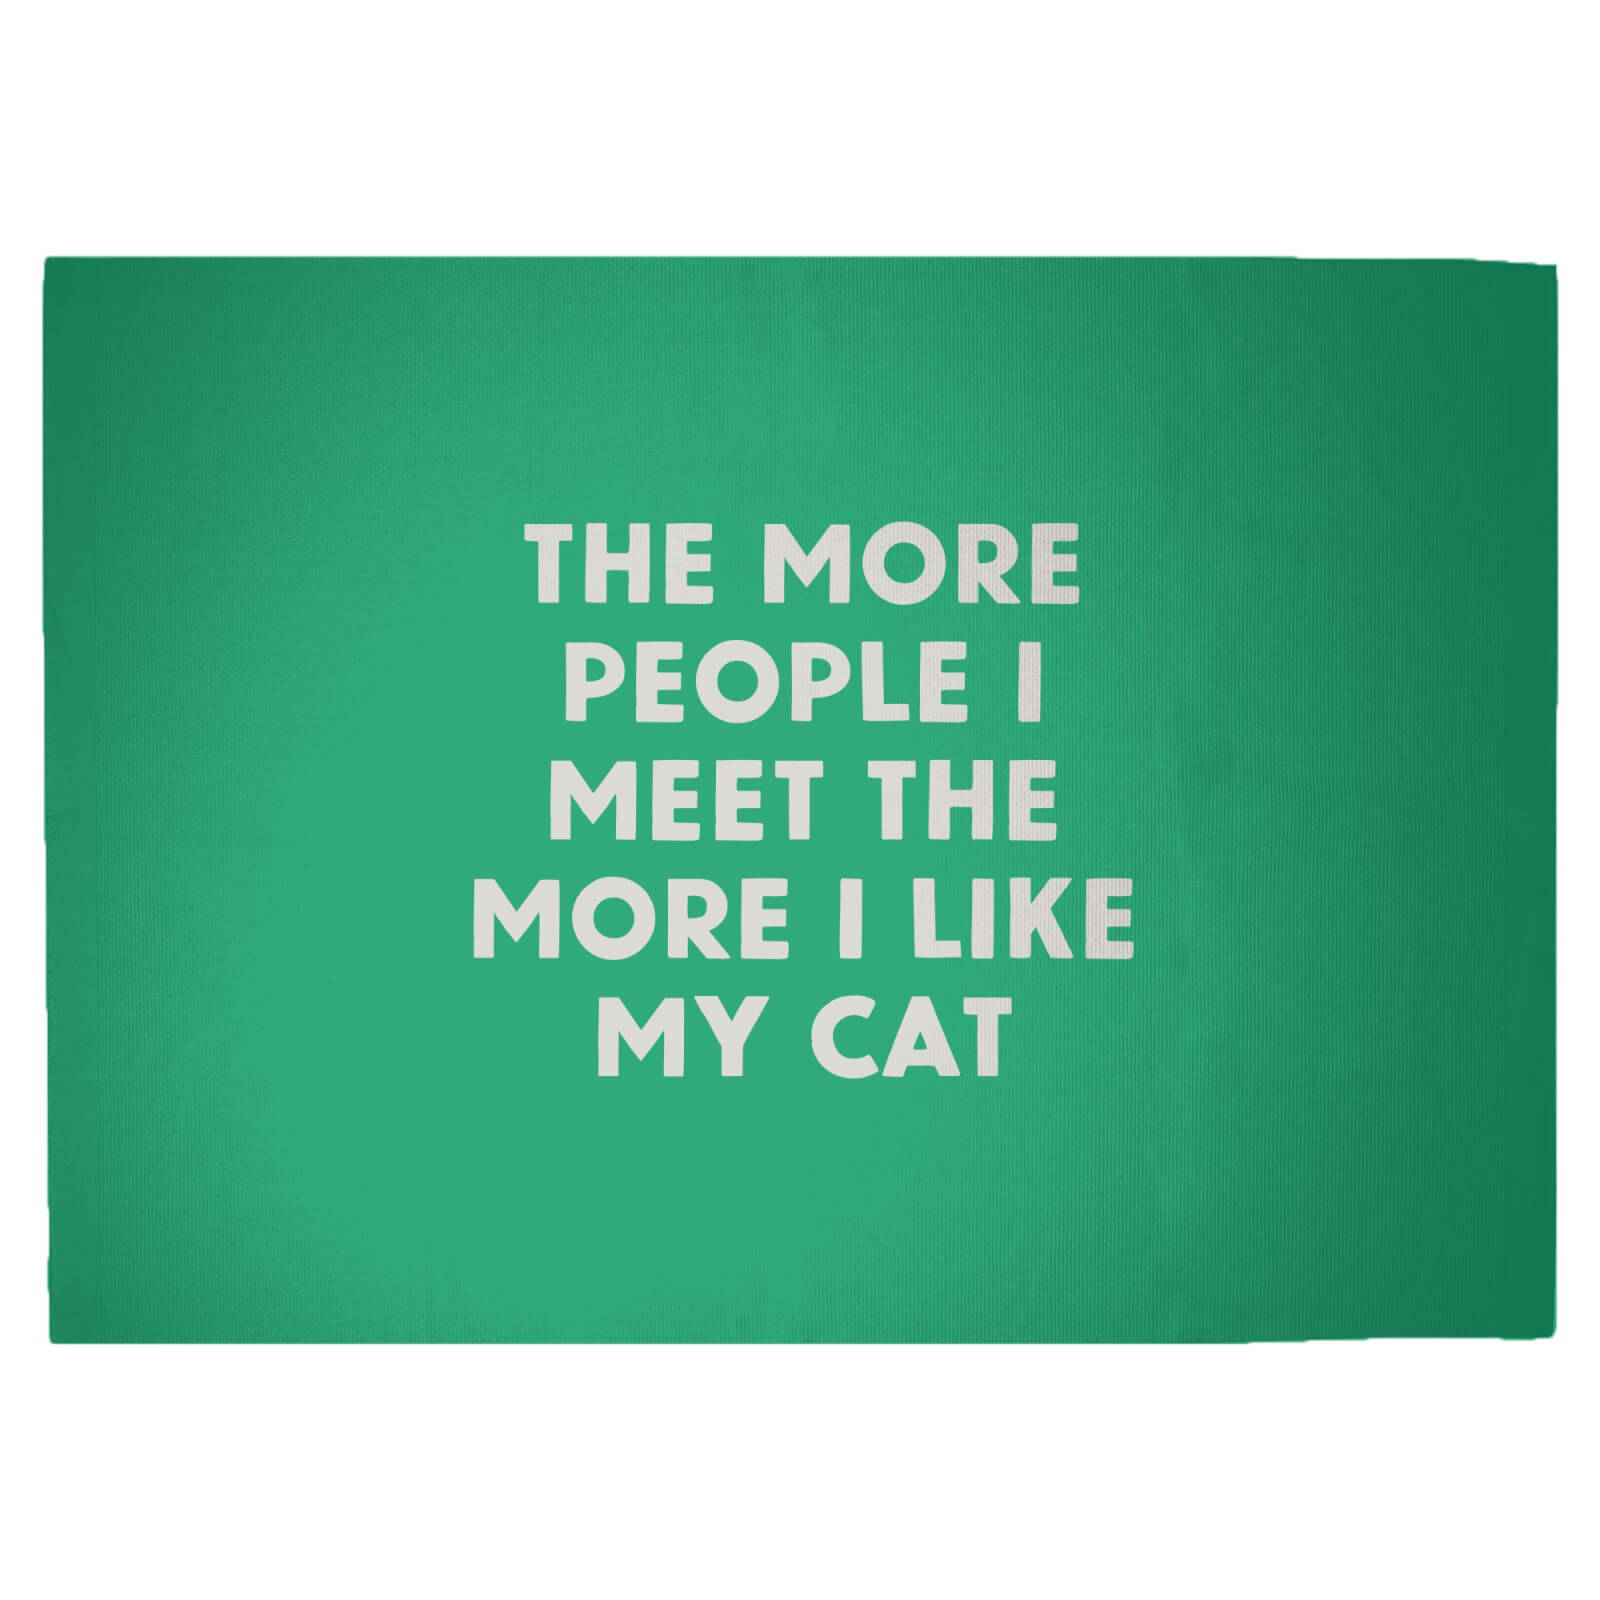 The More People I Meet The More I Like My Cat Woven Rug - Large